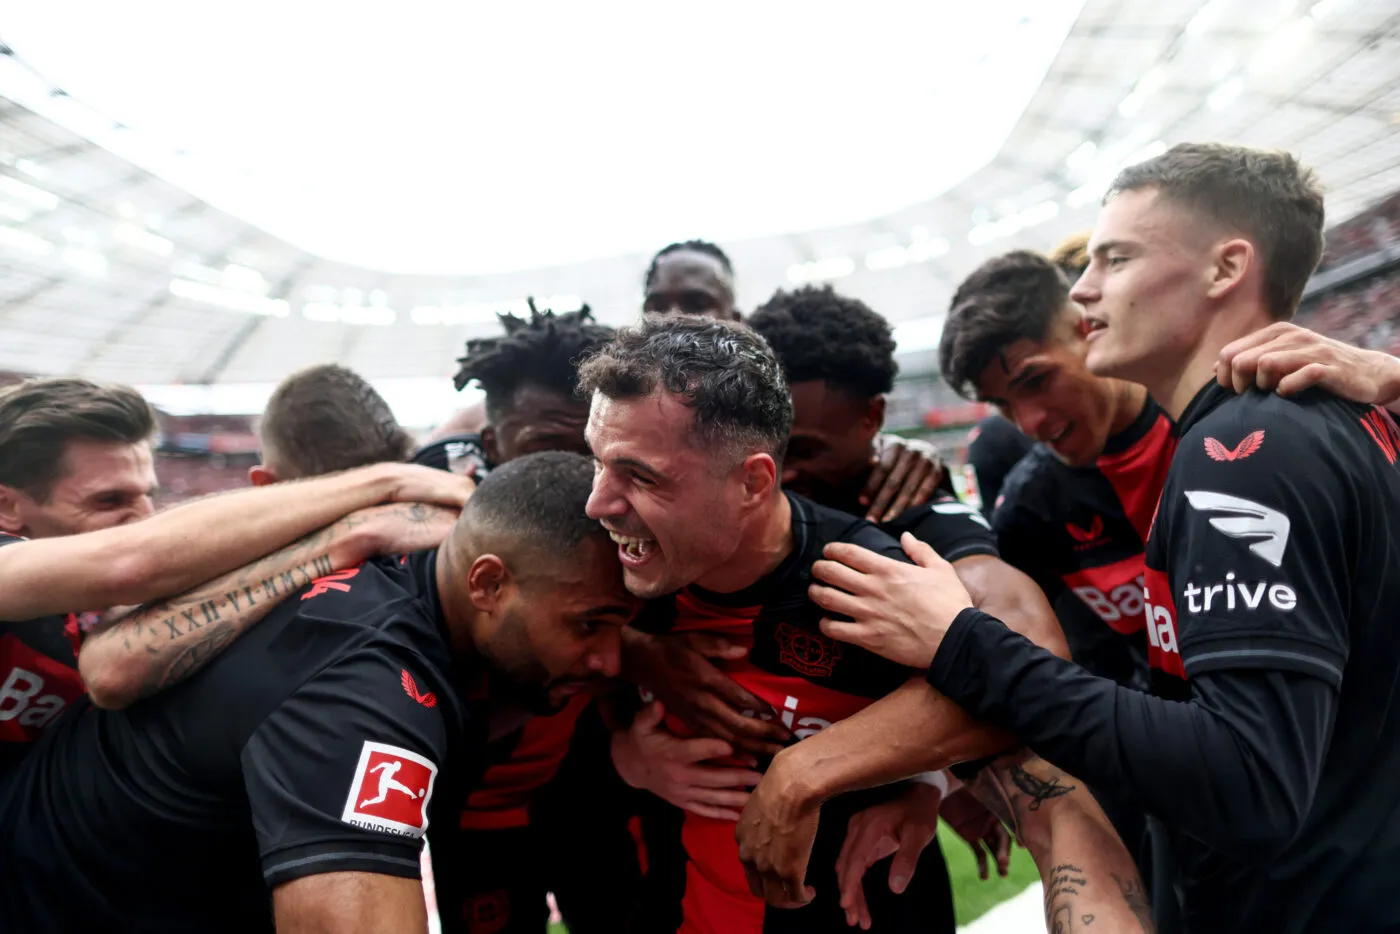 dpatop - 14 April 2024, North Rhine-Westphalia, Leverkusen: Soccer: Bundesliga, Bayer 04 Leverkusen - SV Werder Bremen, Matchday 29, BayArena. Leverkusen's Granit Xhaka (M) is cheered by his teammates after his goal to make it 2-0. IMPORTANT NOTE: In accordance with the regulations of the DFL German Football League and the DFB German Football Association, it is prohibited to exploit or have exploited photographs taken in the stadium and/or of the match in the form of sequential images and/or video-like photo series. Photo: Rolf Vennenbernd/dpa Photo by Icon Sport   - Photo by Icon Sport